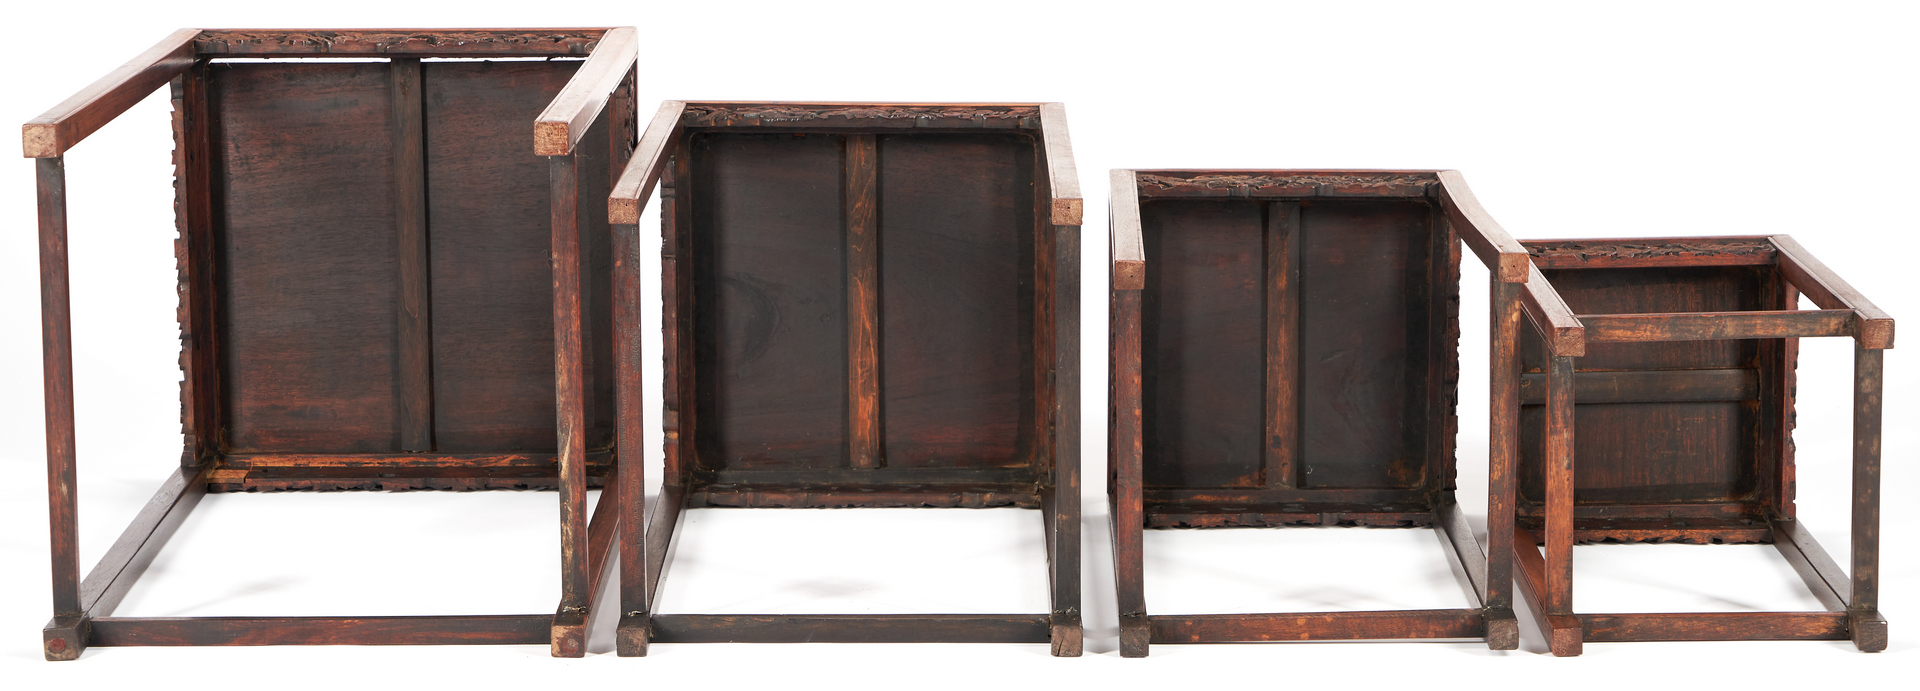 Lot 50: Chinese Hardwood Tables, incl. Nesting Tables, 5 items